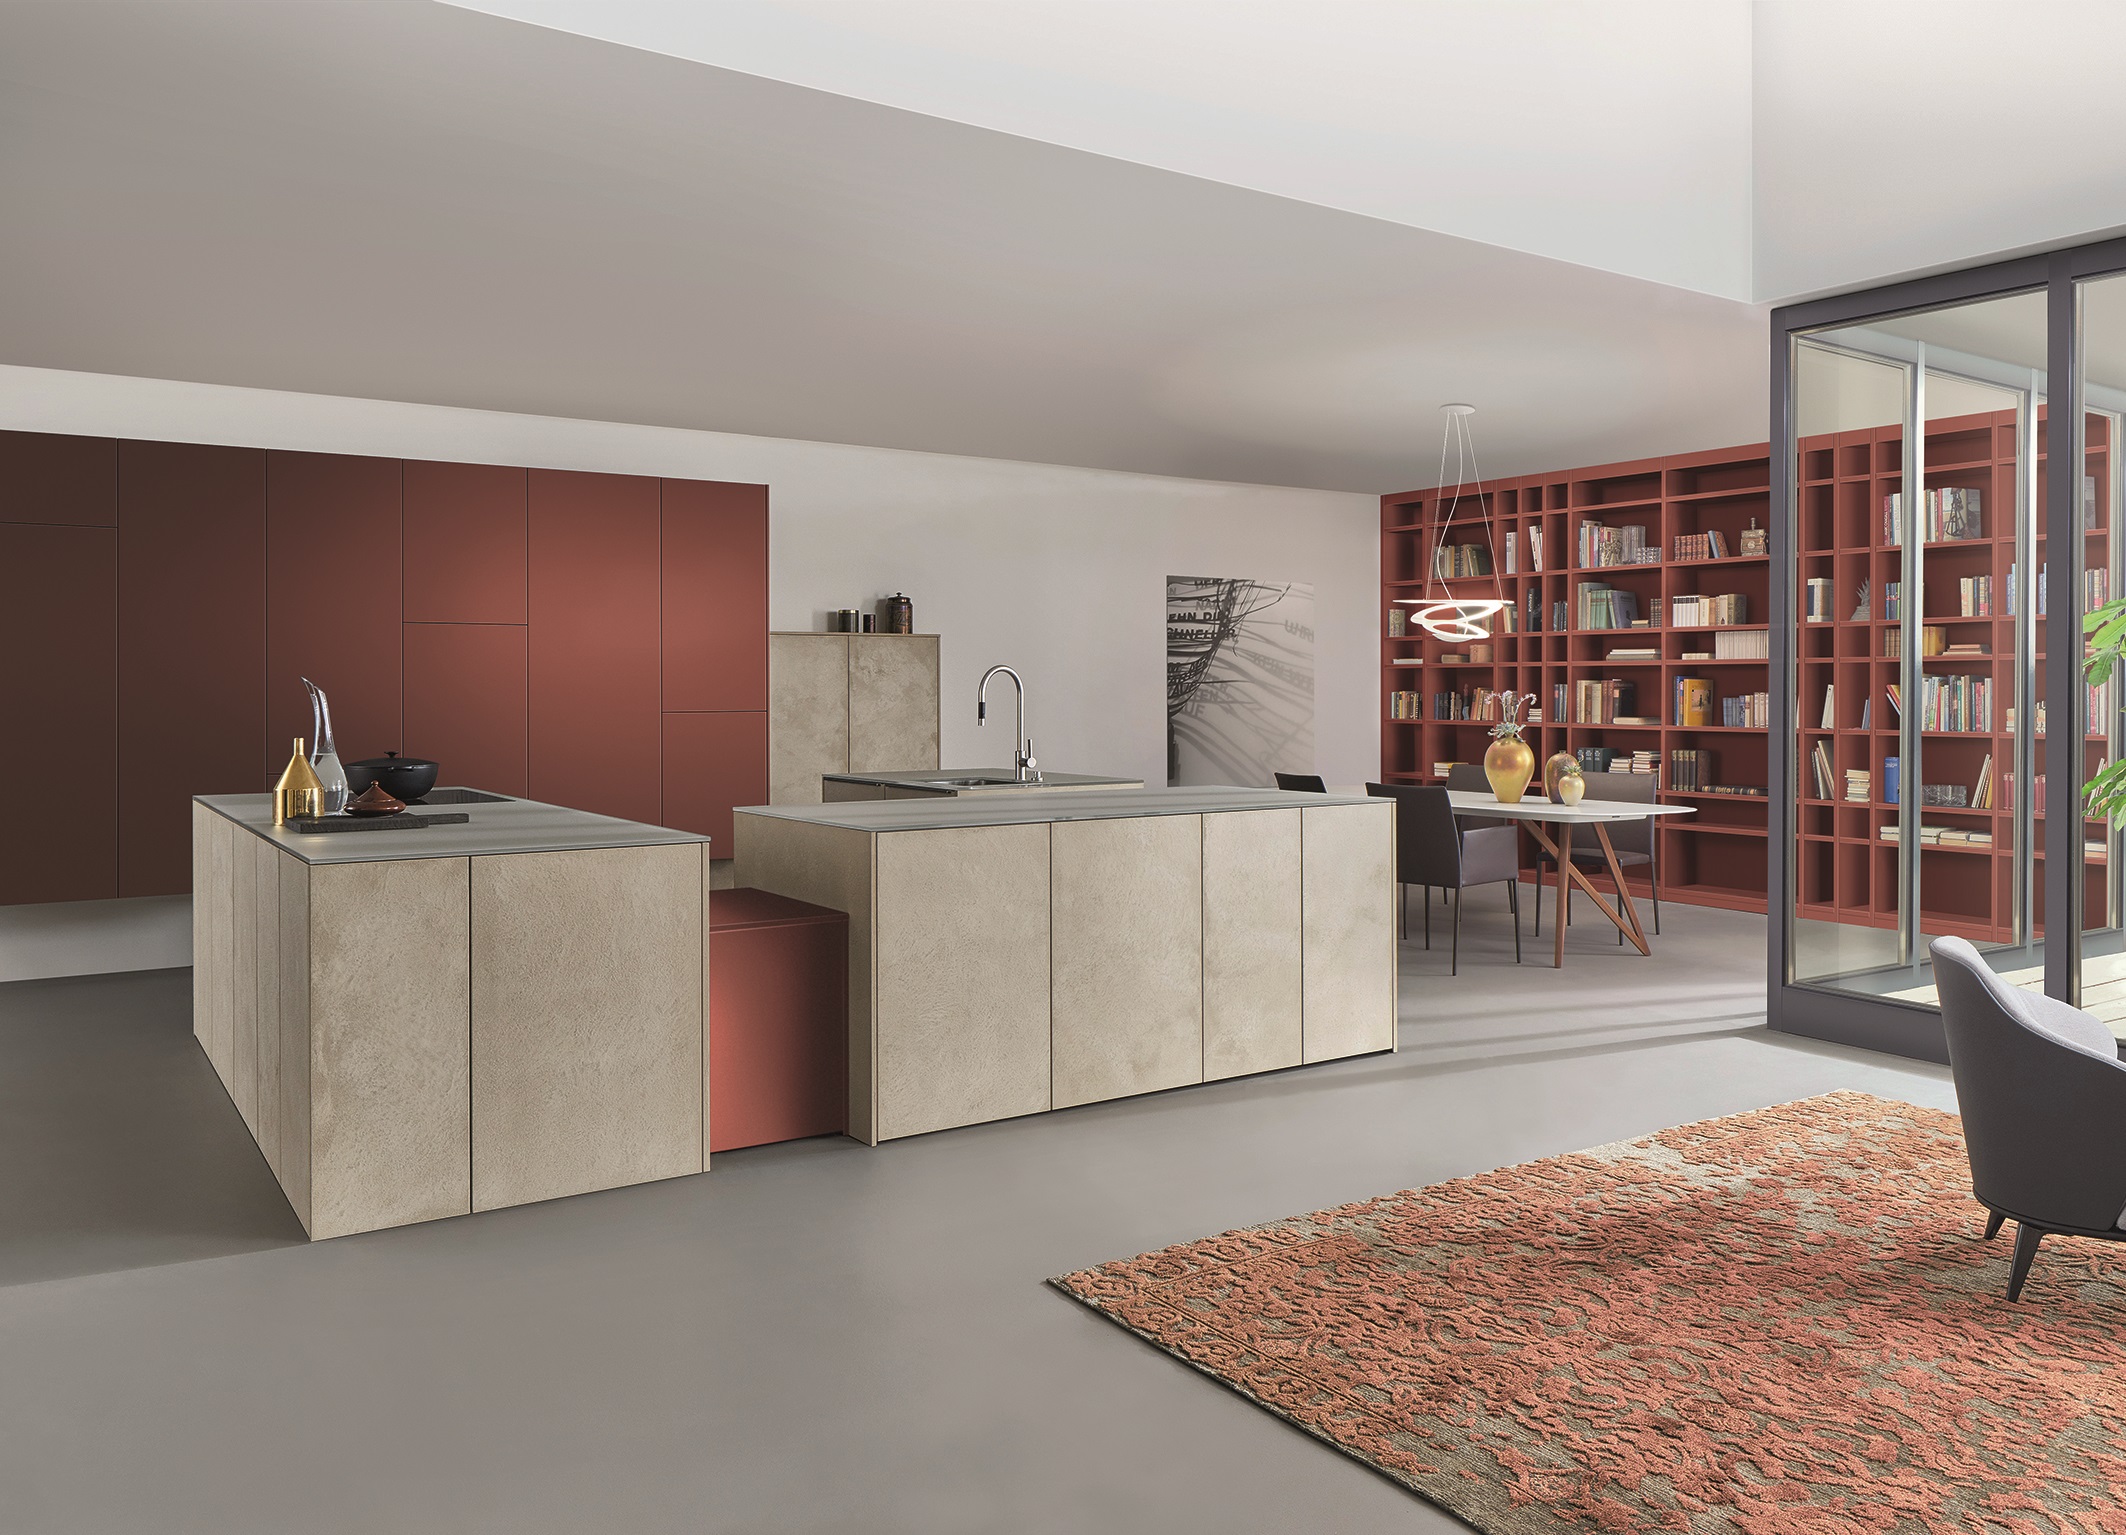 The room as a whole, kitchen and living area are one: this philosophy finds expression in the planning approach. The kitchen planning comprises the top-quality interior design through to the tailor-made shelving system.